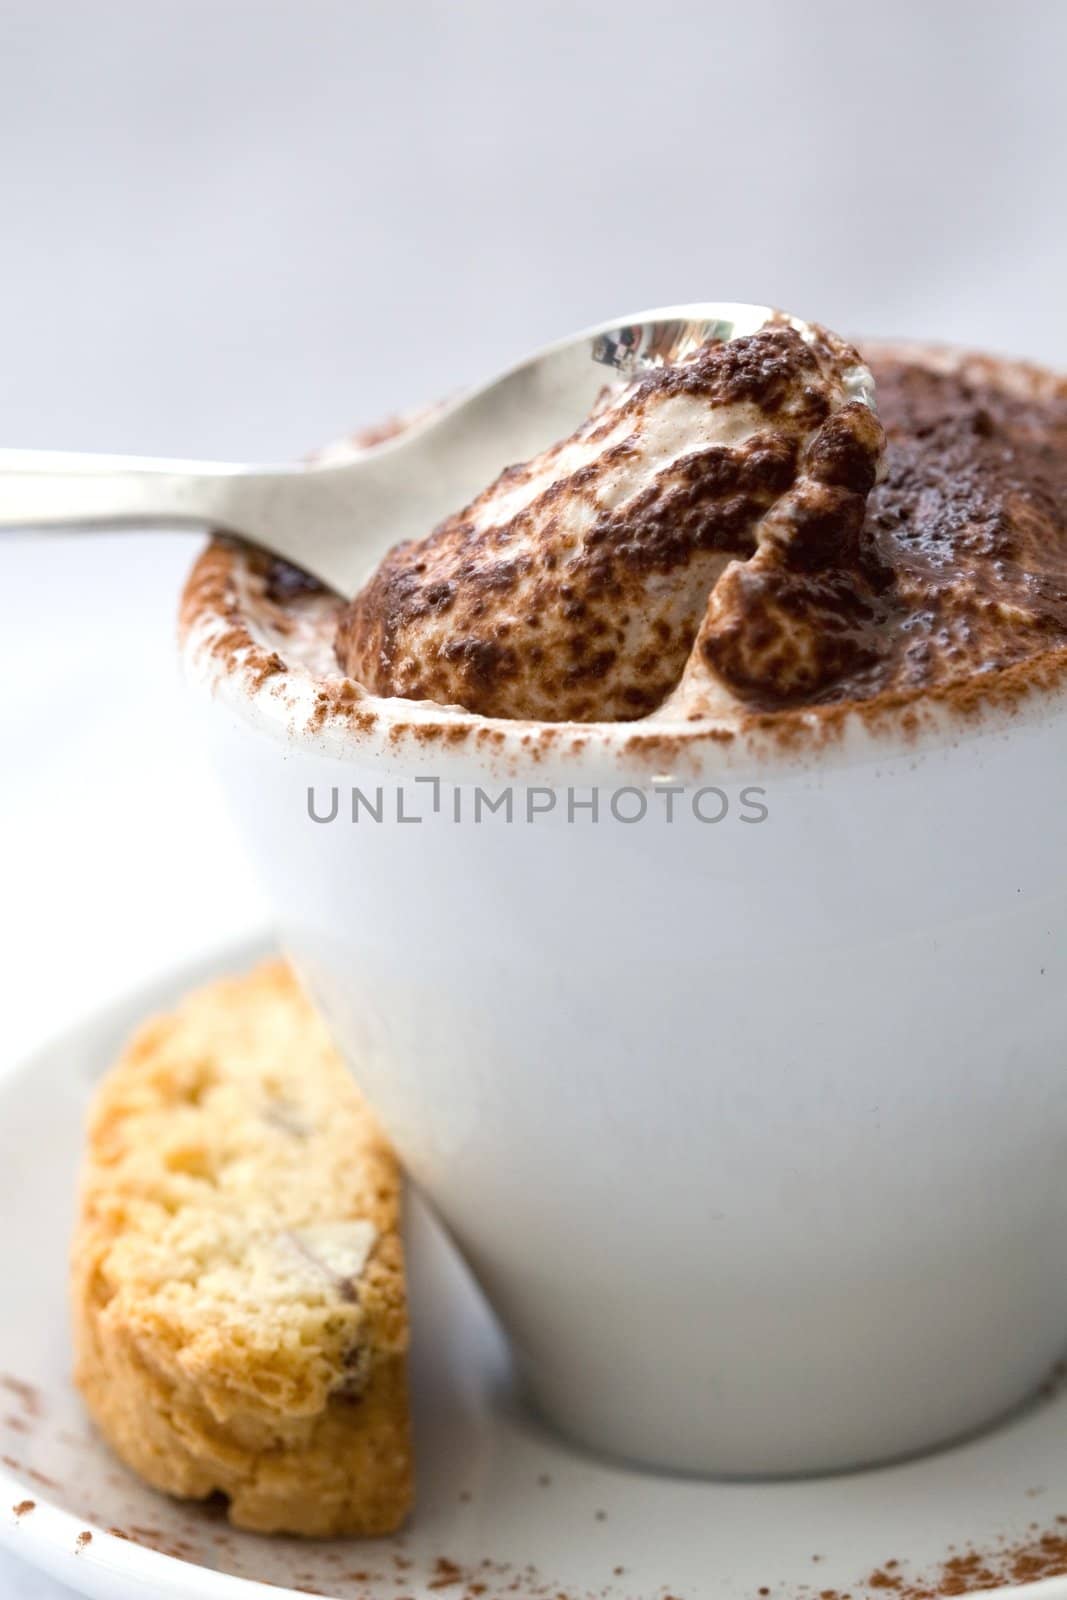 Small italian coffee cup filled with creamy mascarpone dessert topped with a little bit of chocolate